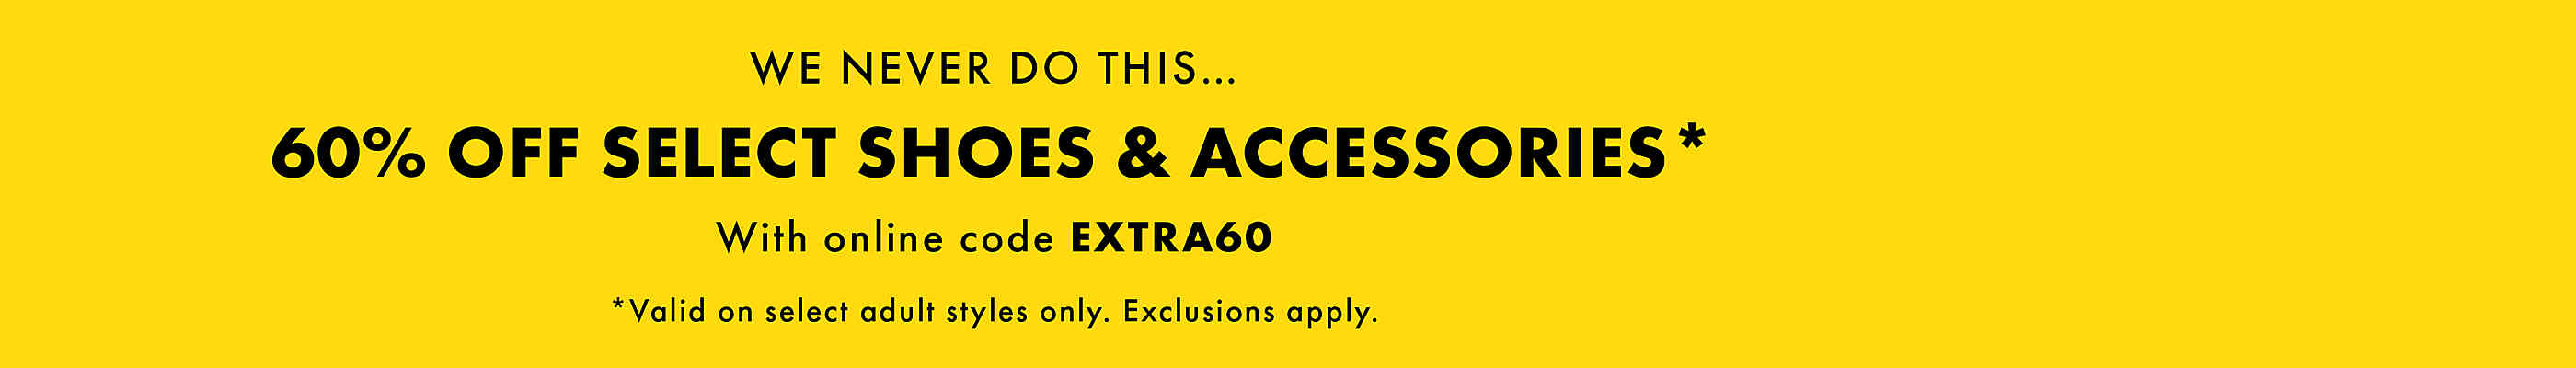 We never do this...60% off select shoes & accessories* With online code EXTRA60. *Valid on select adult styles only. Exclusions apply.